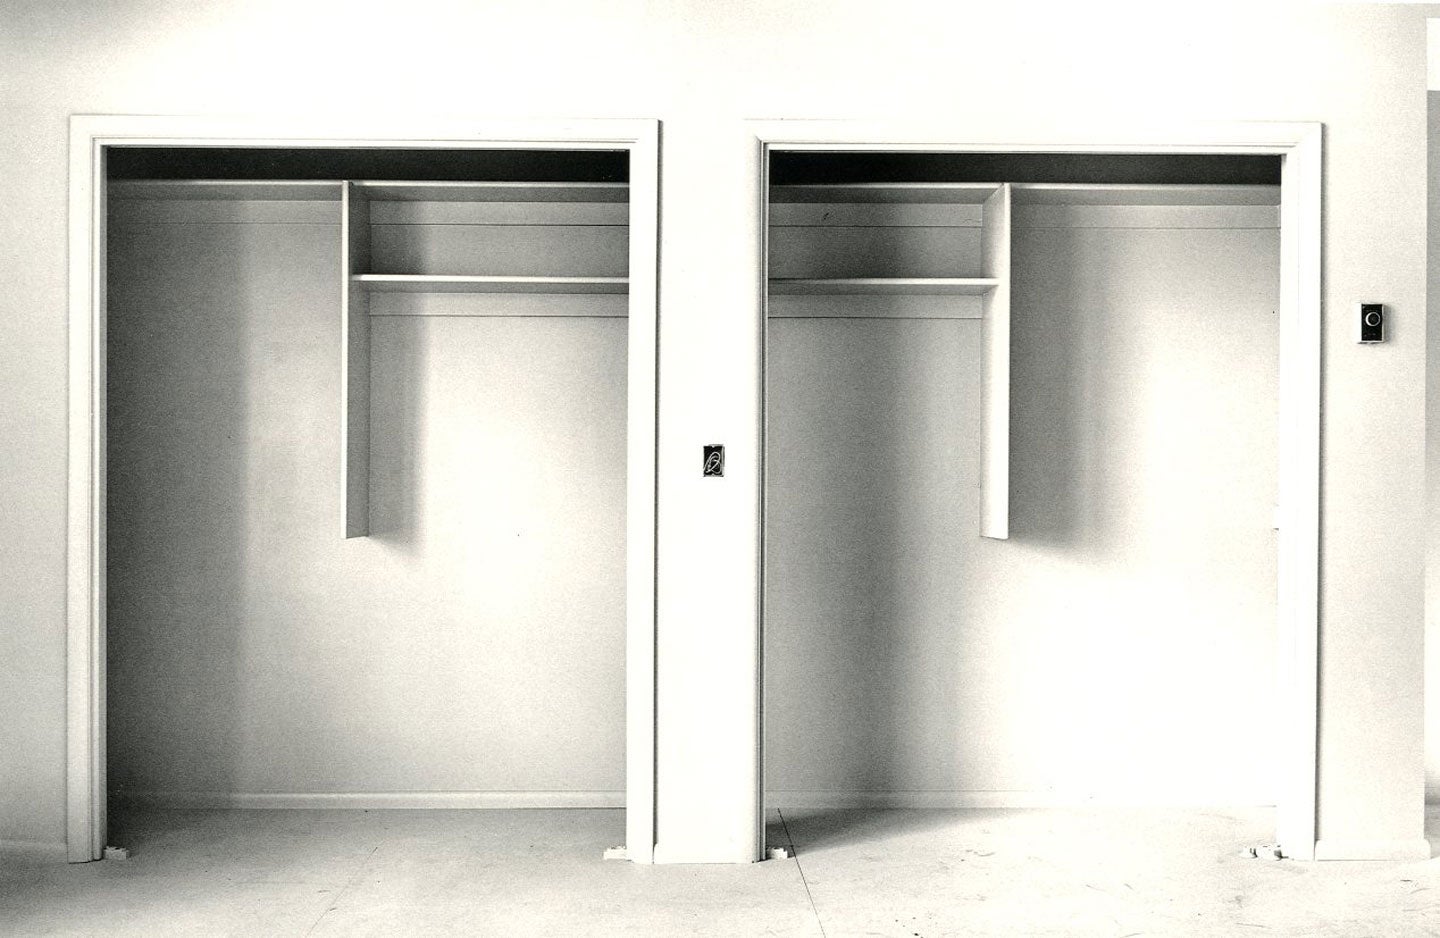 Lewis Baltz: Park City (First Edition) [SIGNED] [IMPERFECT] -- Includes a copy of the publisher ARTSPACE's original 1980 book release announcement